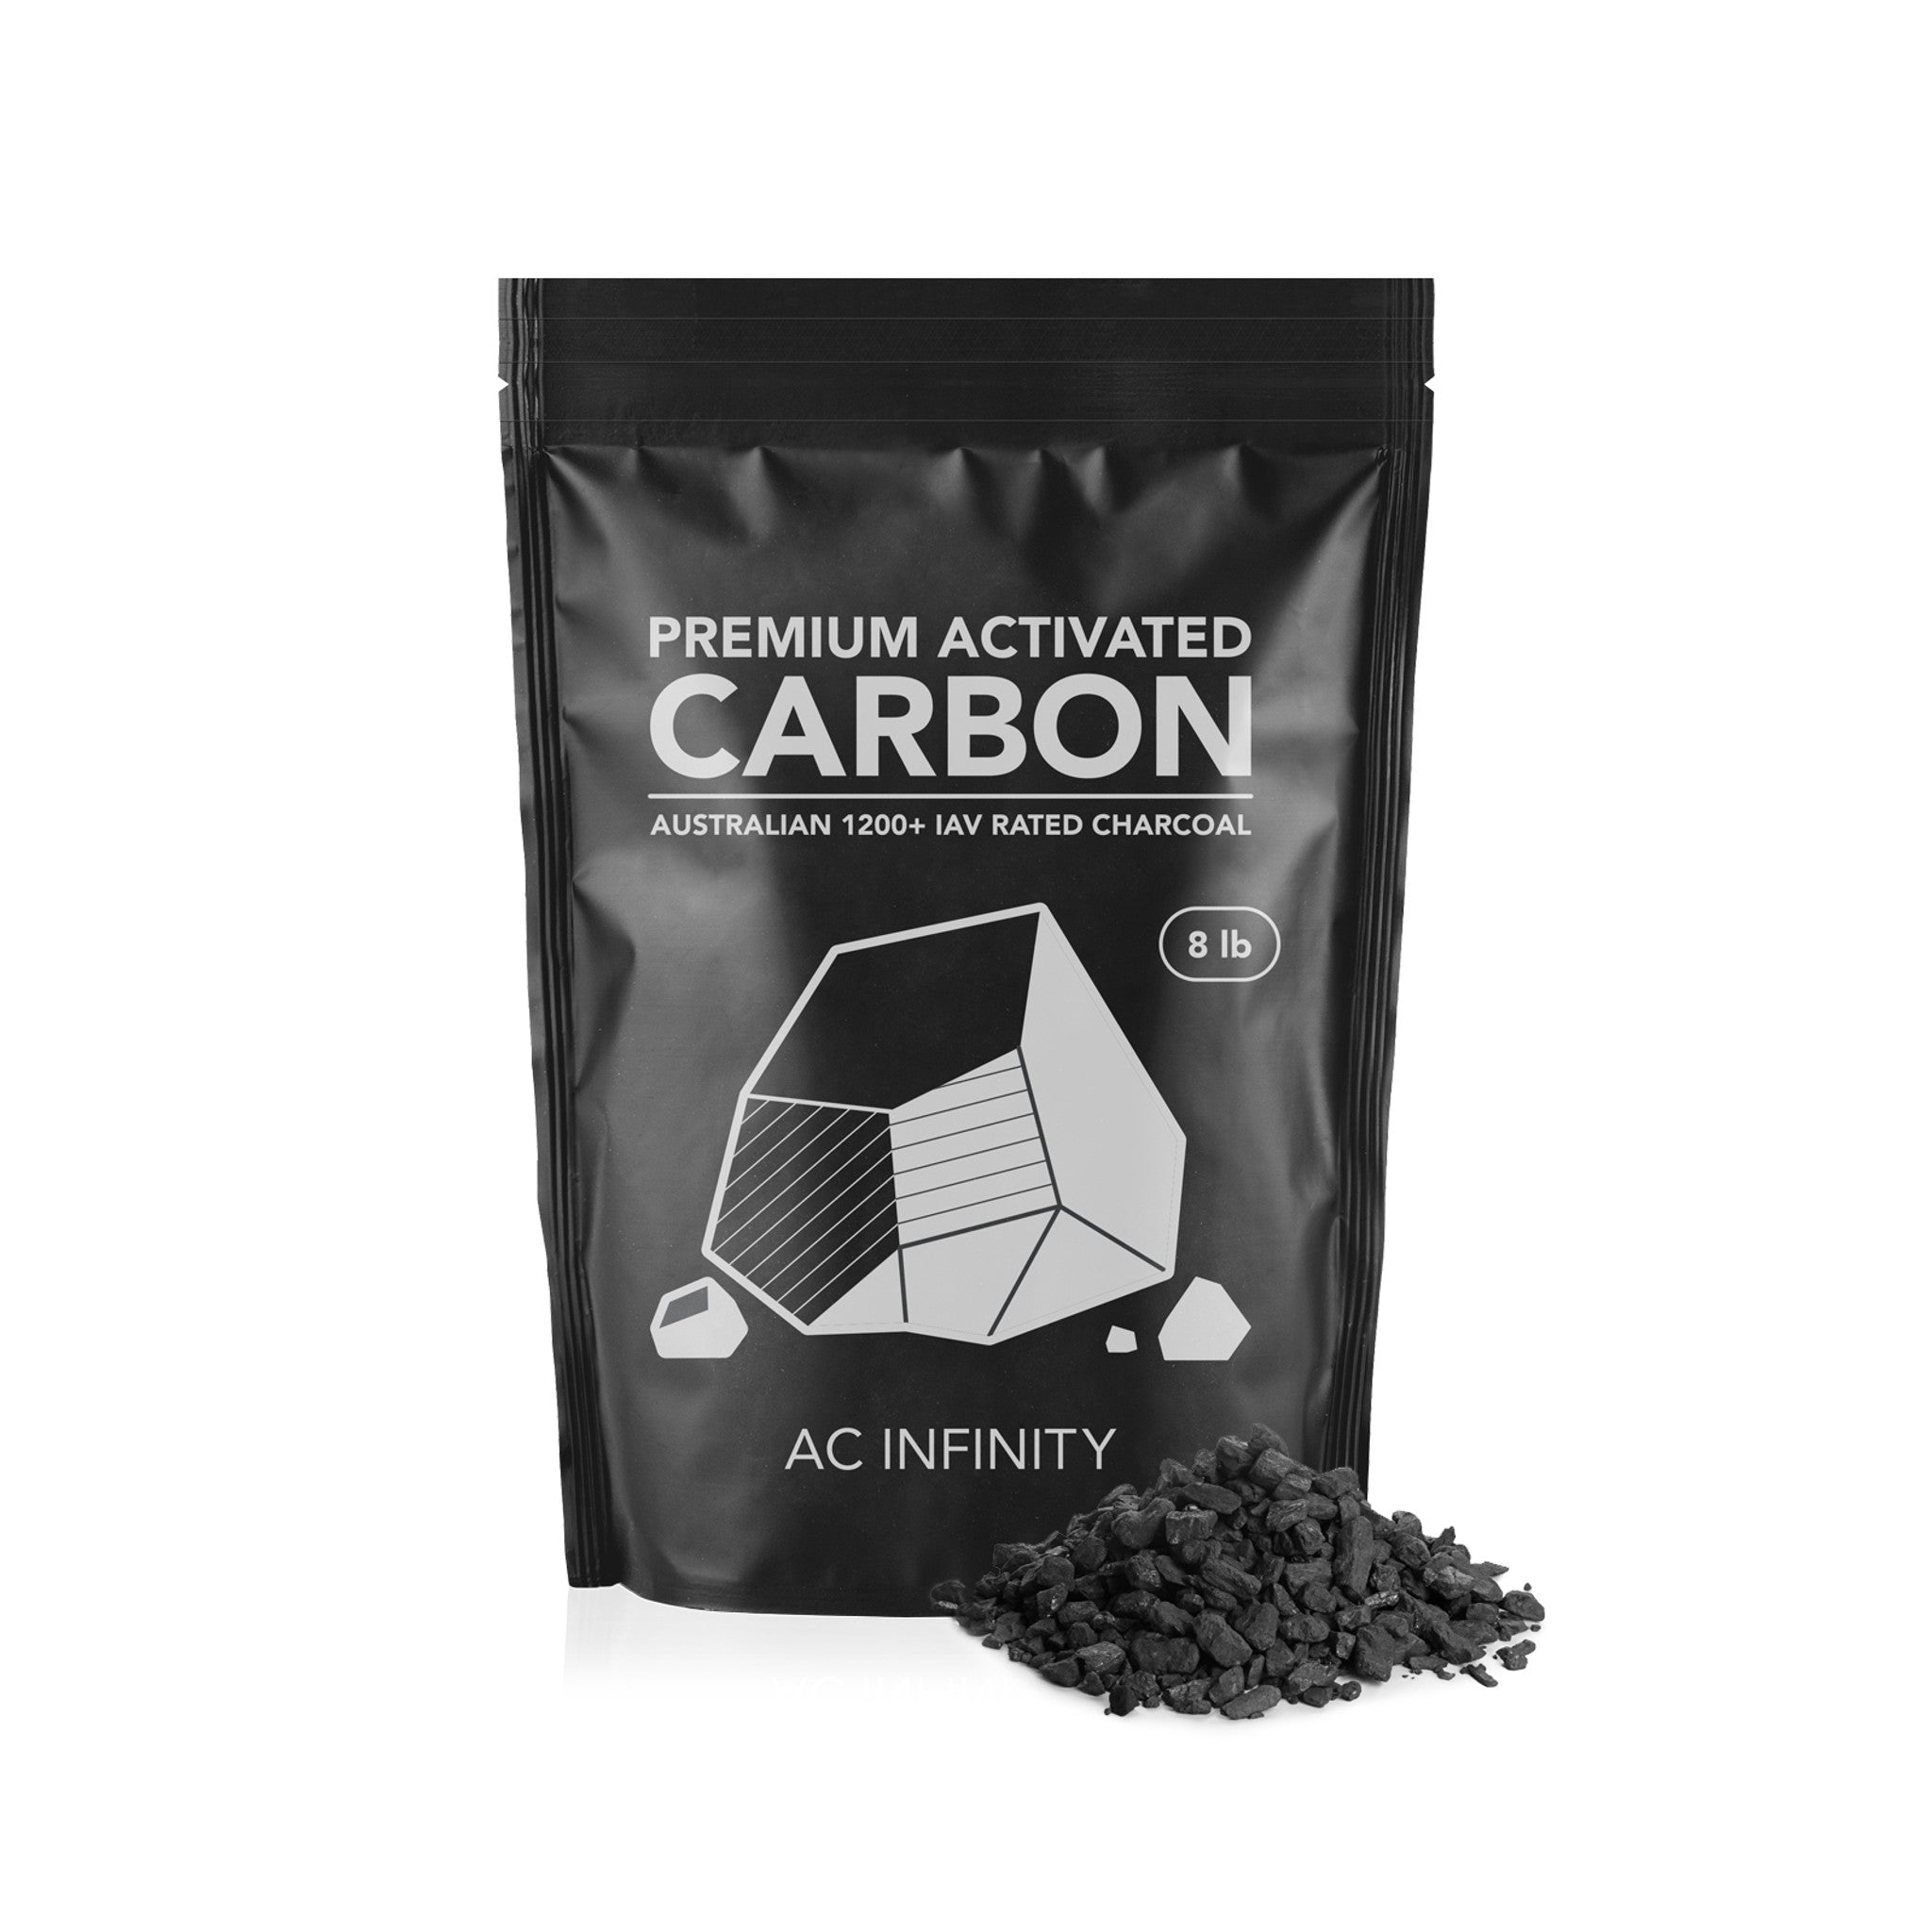 AC INFINITY ACTIVATED CARBON REFILL, 1200+ IAV AUSTRALIAN CHARCOAL